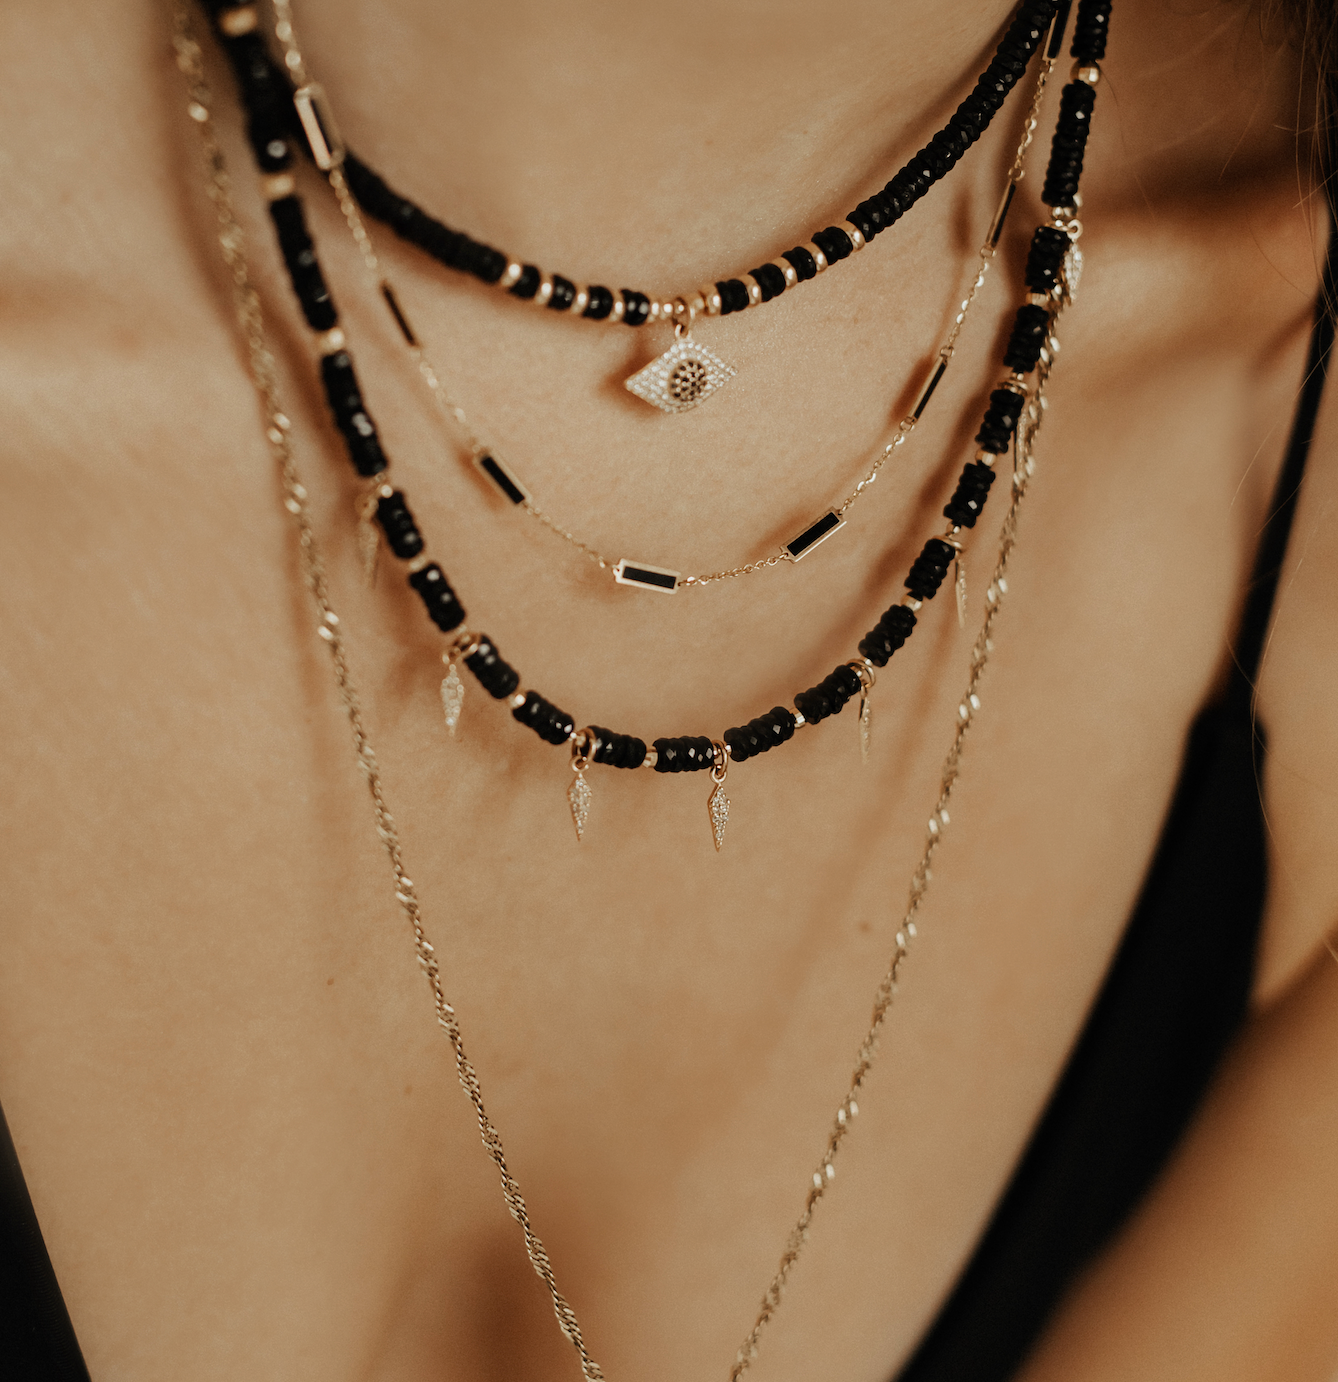 BLACK SPINEL NECKLACE WITH DIAMOND SPIKES